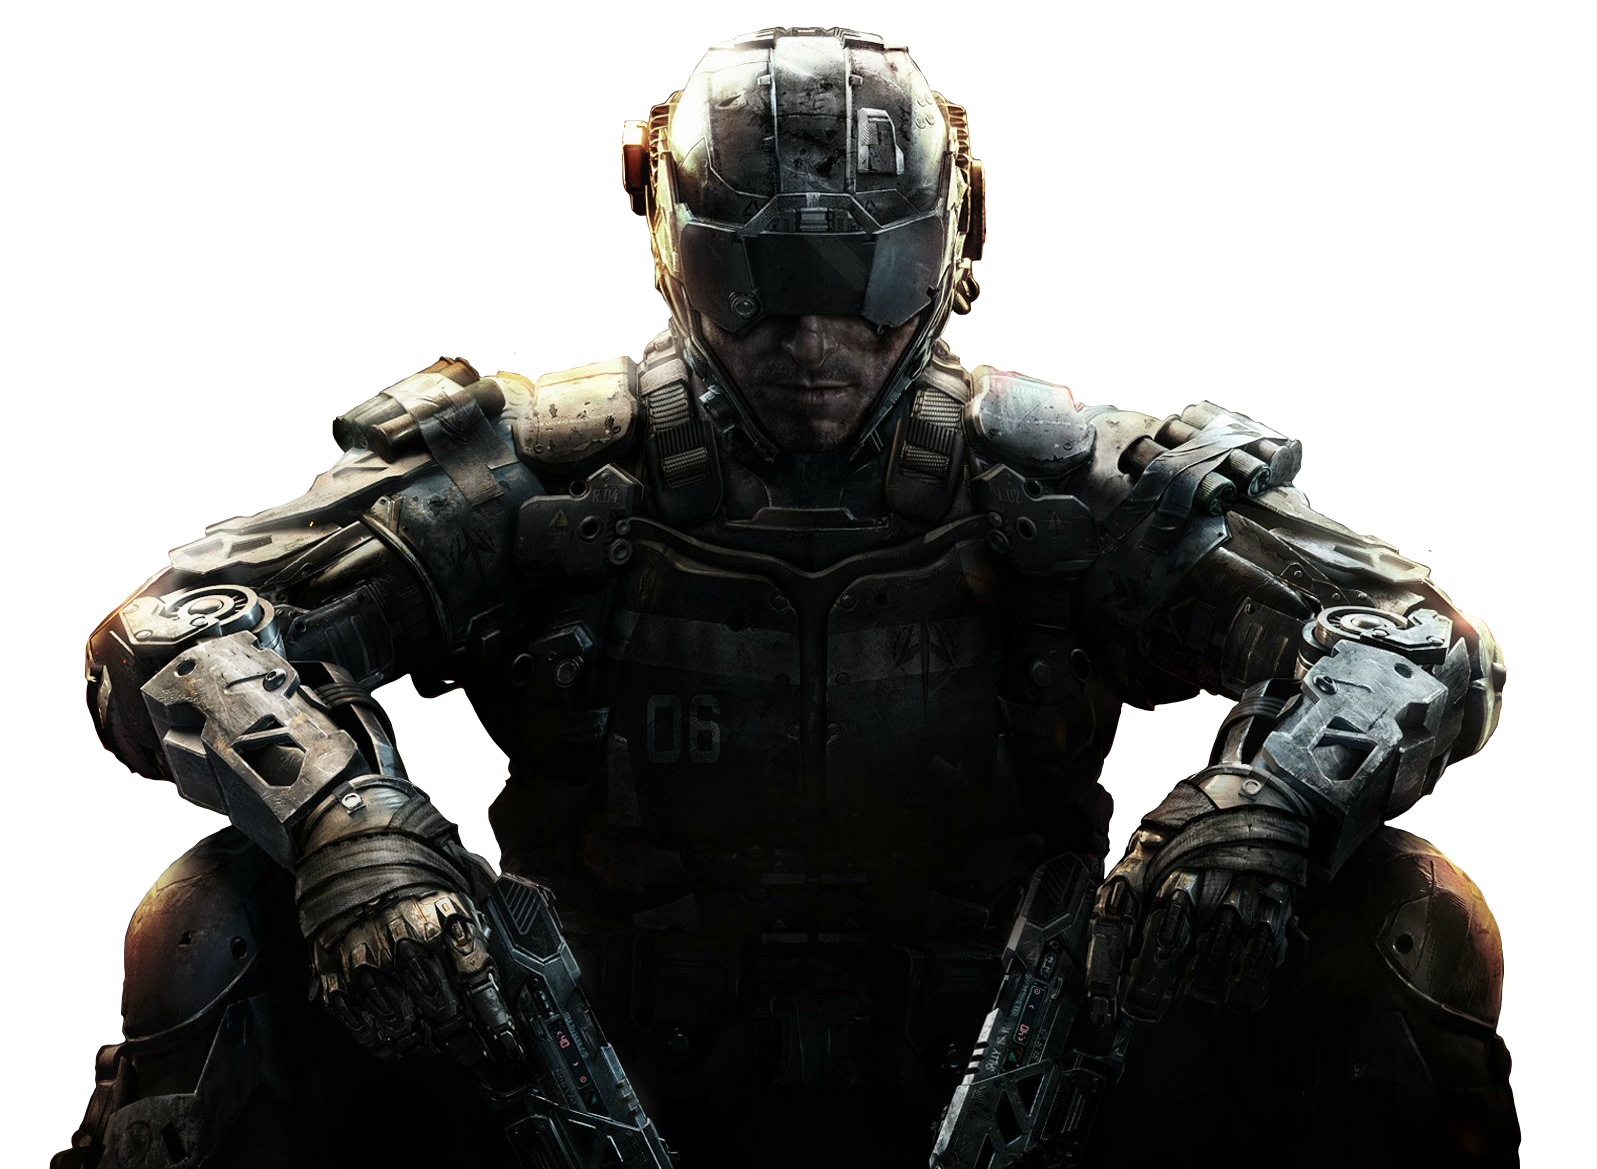 call of duty black ops 3 cover soldier render by brovvnie d8rfcpk 1597x1169